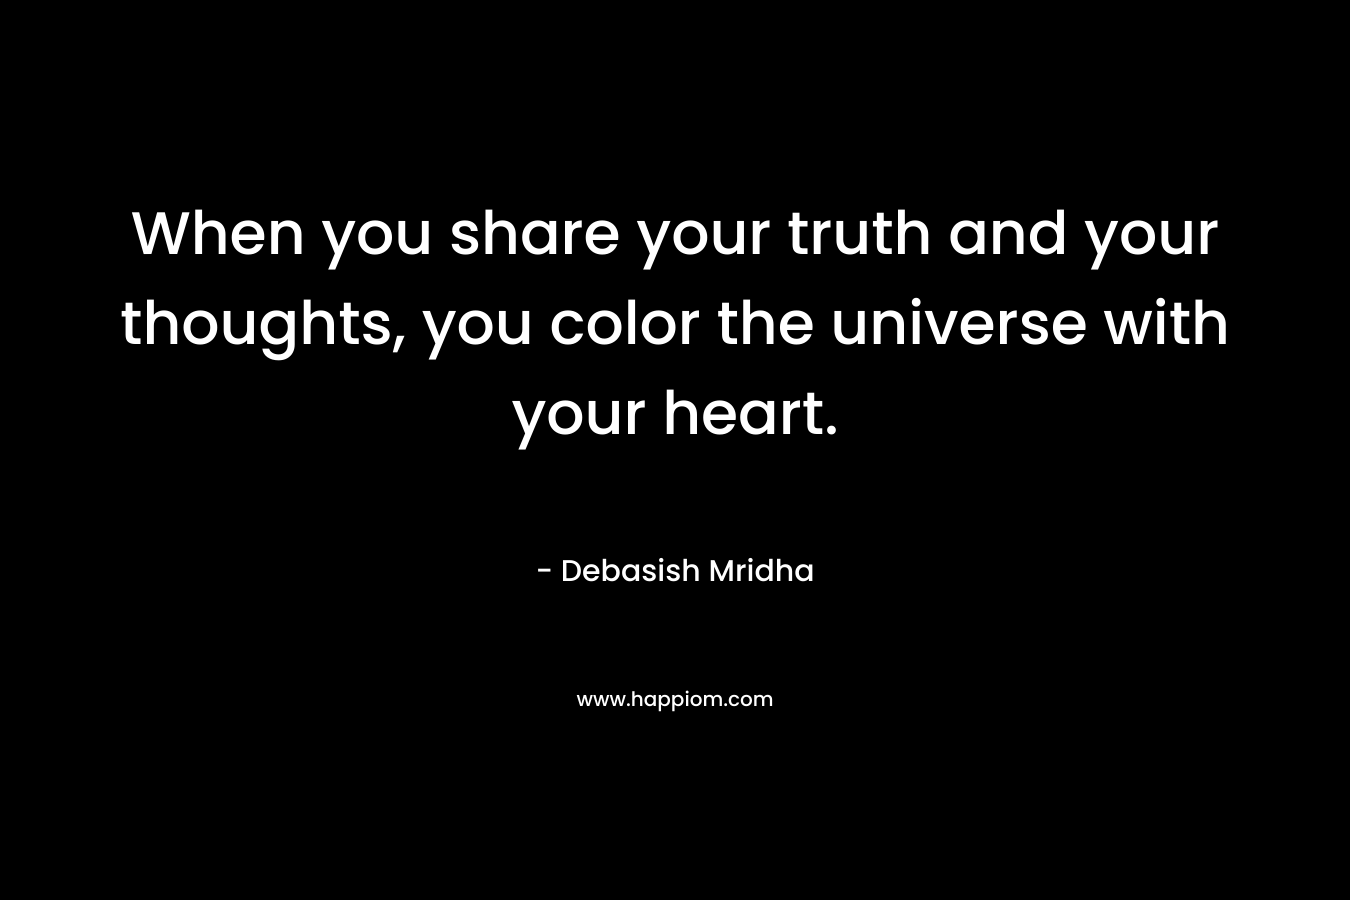 When you share your truth and your thoughts, you color the universe with your heart.